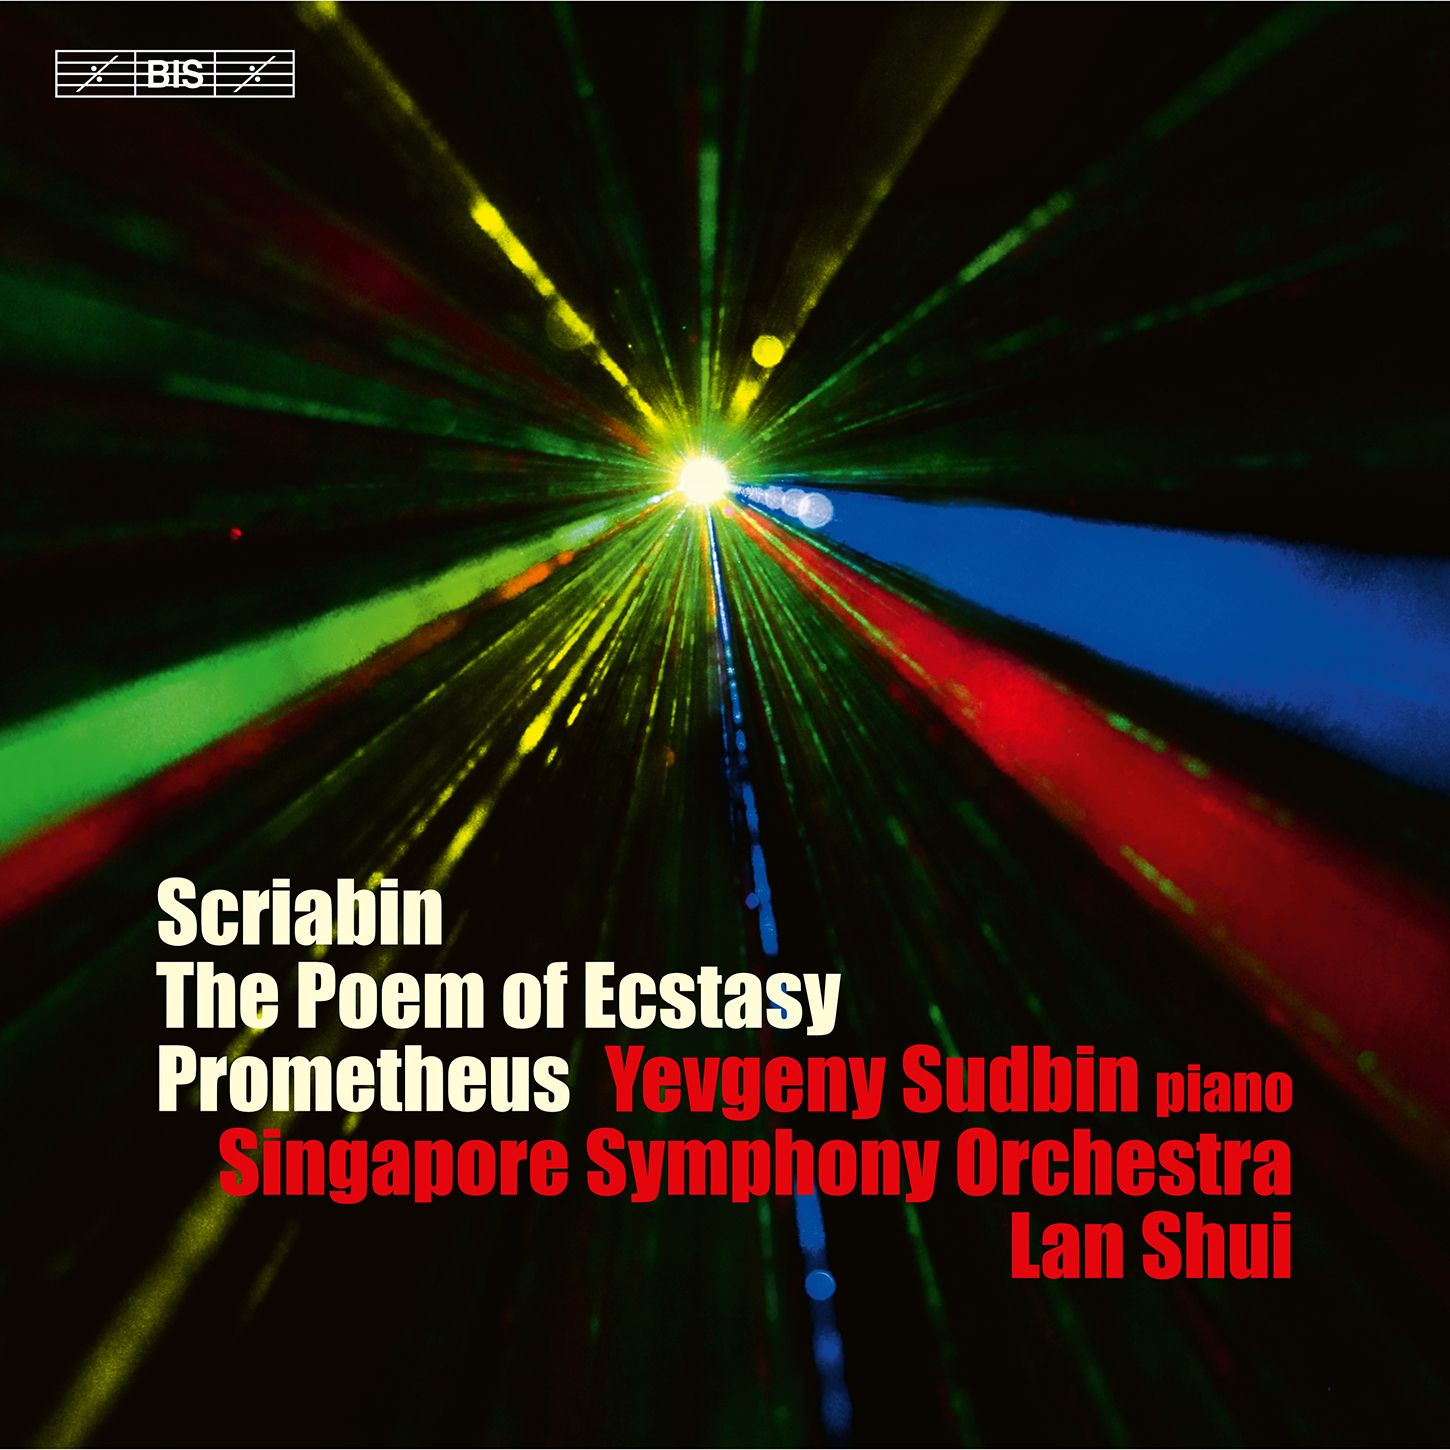 Scriabin's Ecstasy and Fire